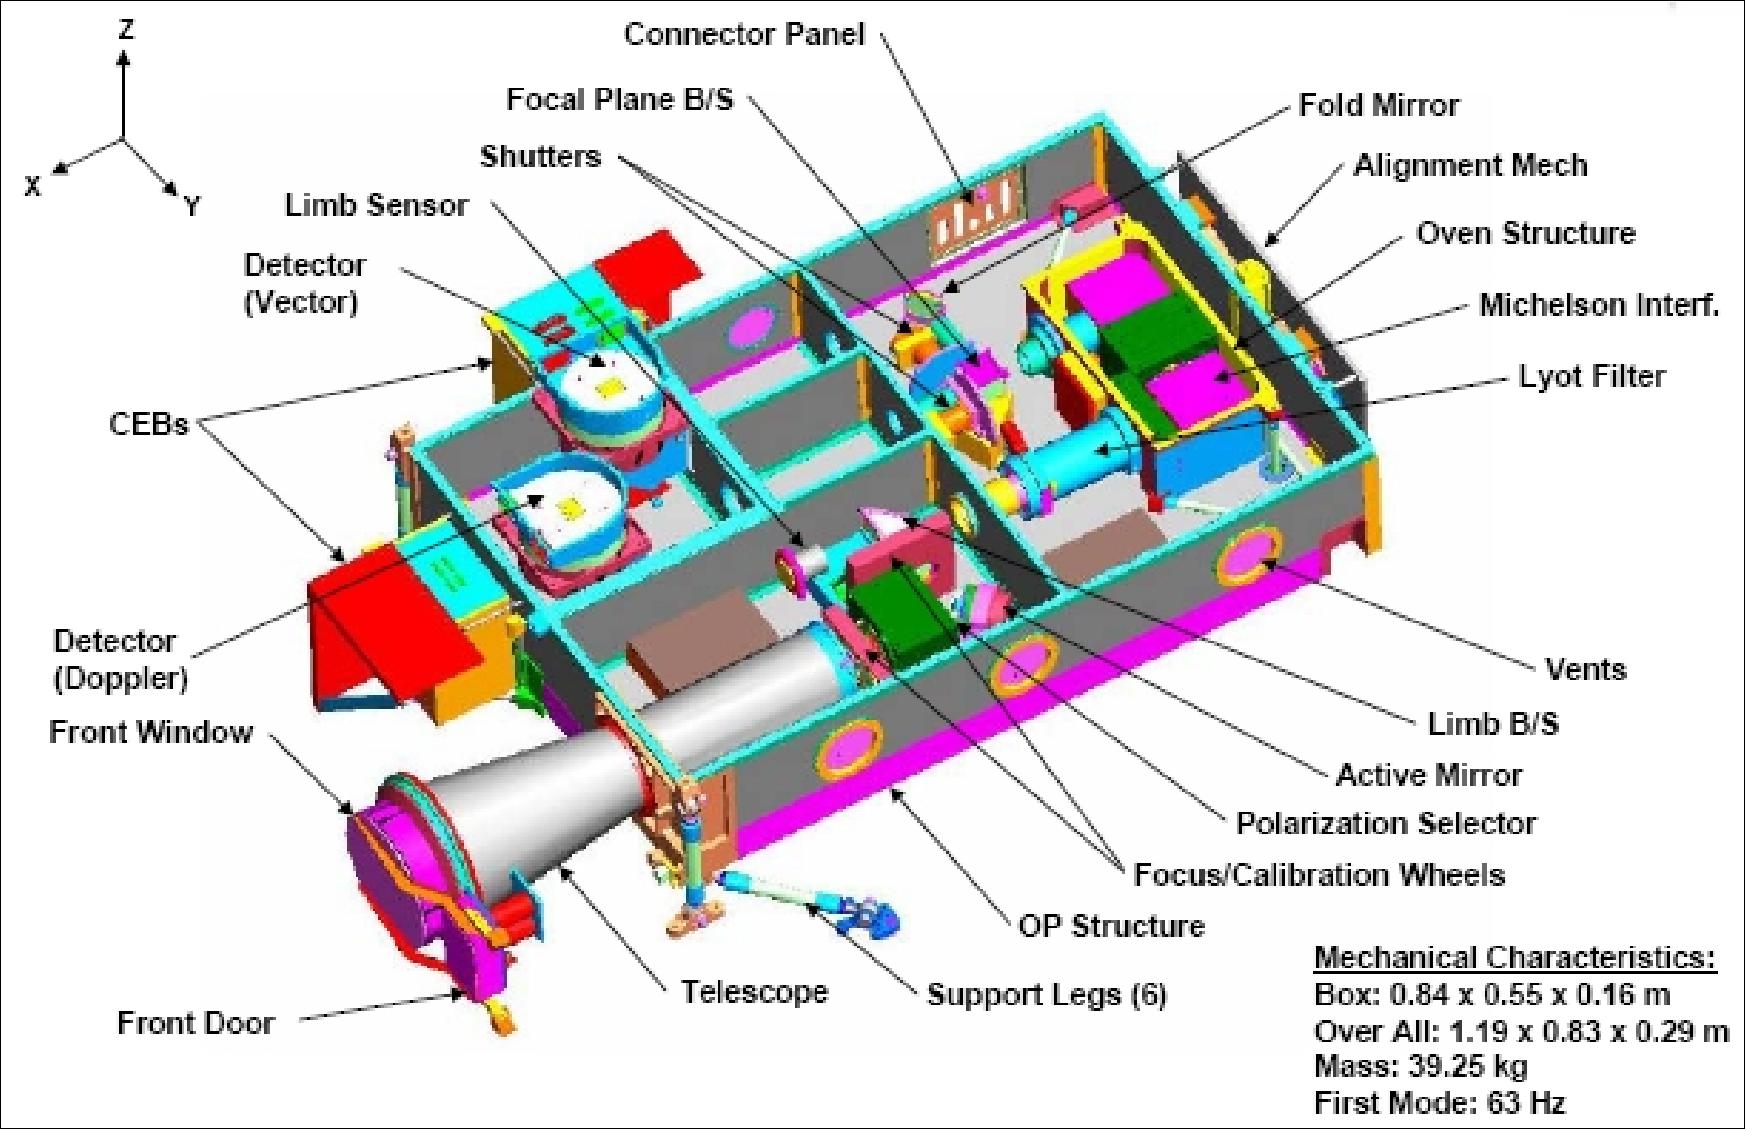 Figure 38: Principal optics package components of the HMI instrument (image credit: Stanford University)